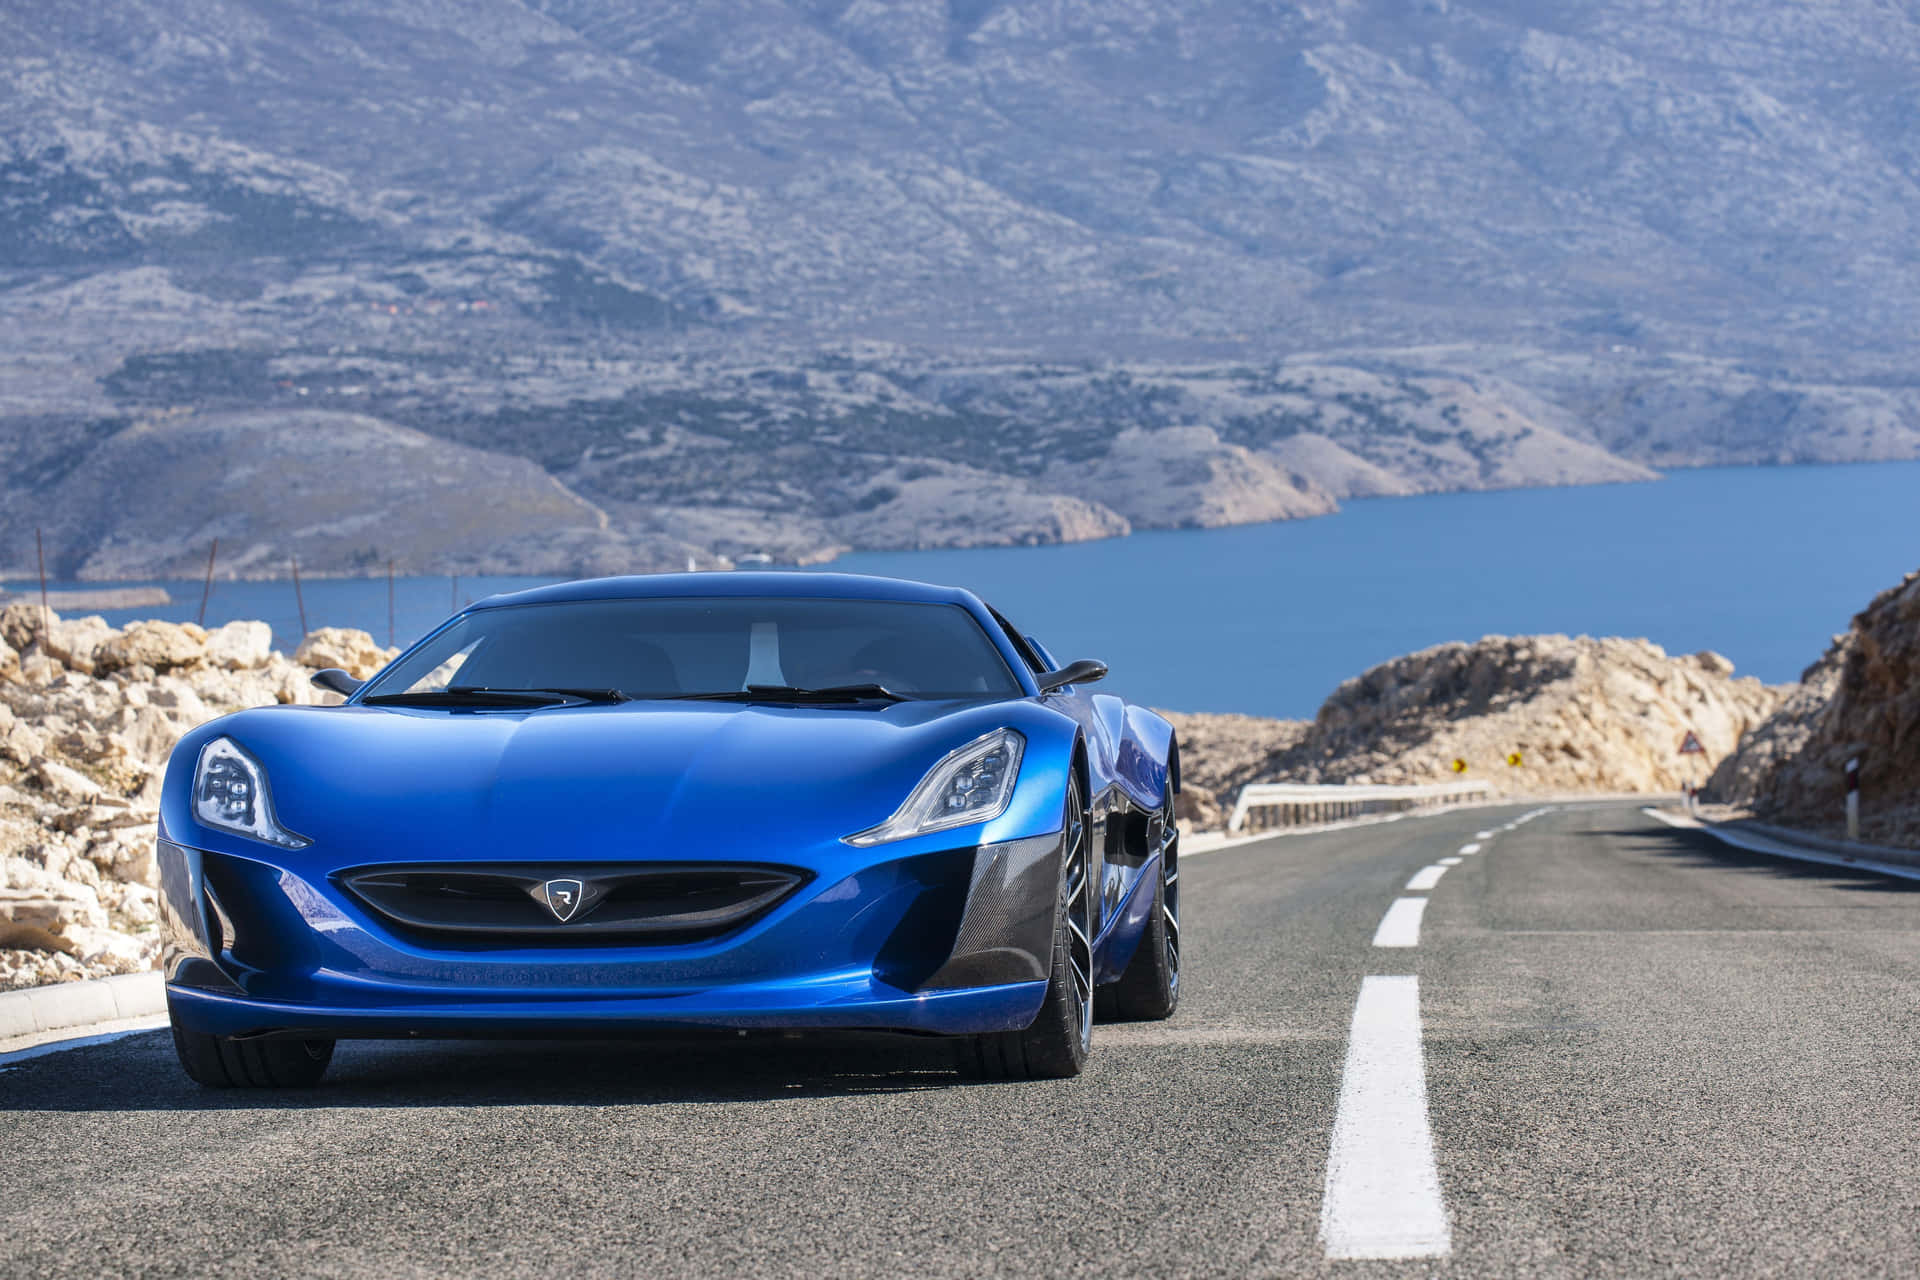 The Futuristic Rimac Concept One - A Power Packed Beauty Wallpaper